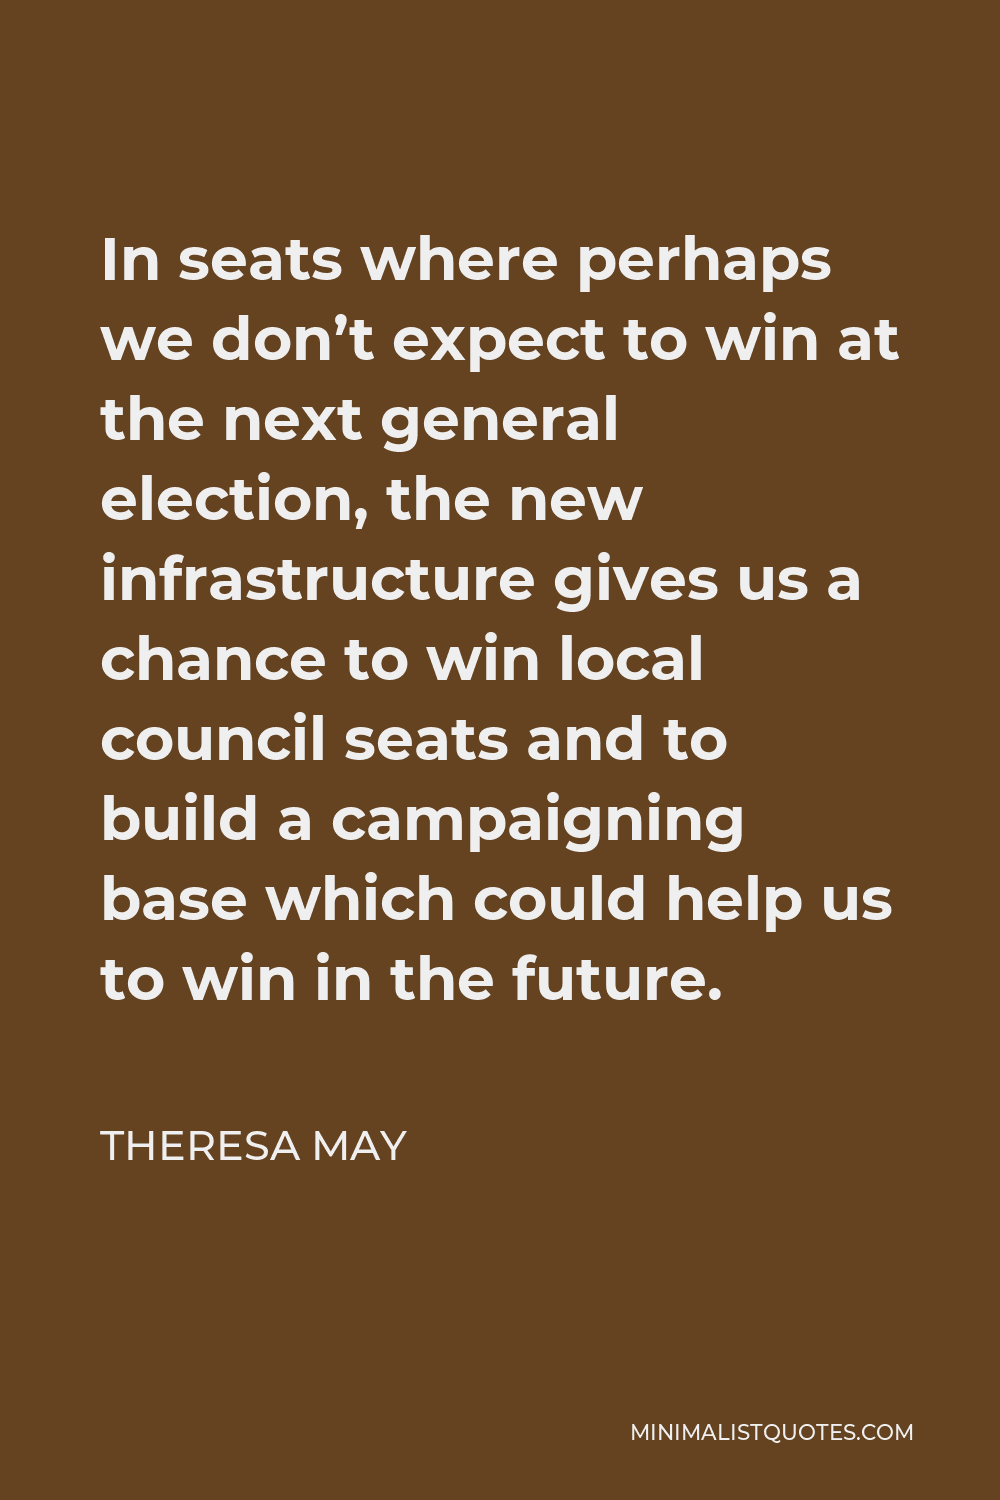 Theresa May Quote - In seats where perhaps we don’t expect to win at the next general election, the new infrastructure gives us a chance to win local council seats and to build a campaigning base which could help us to win in the future.